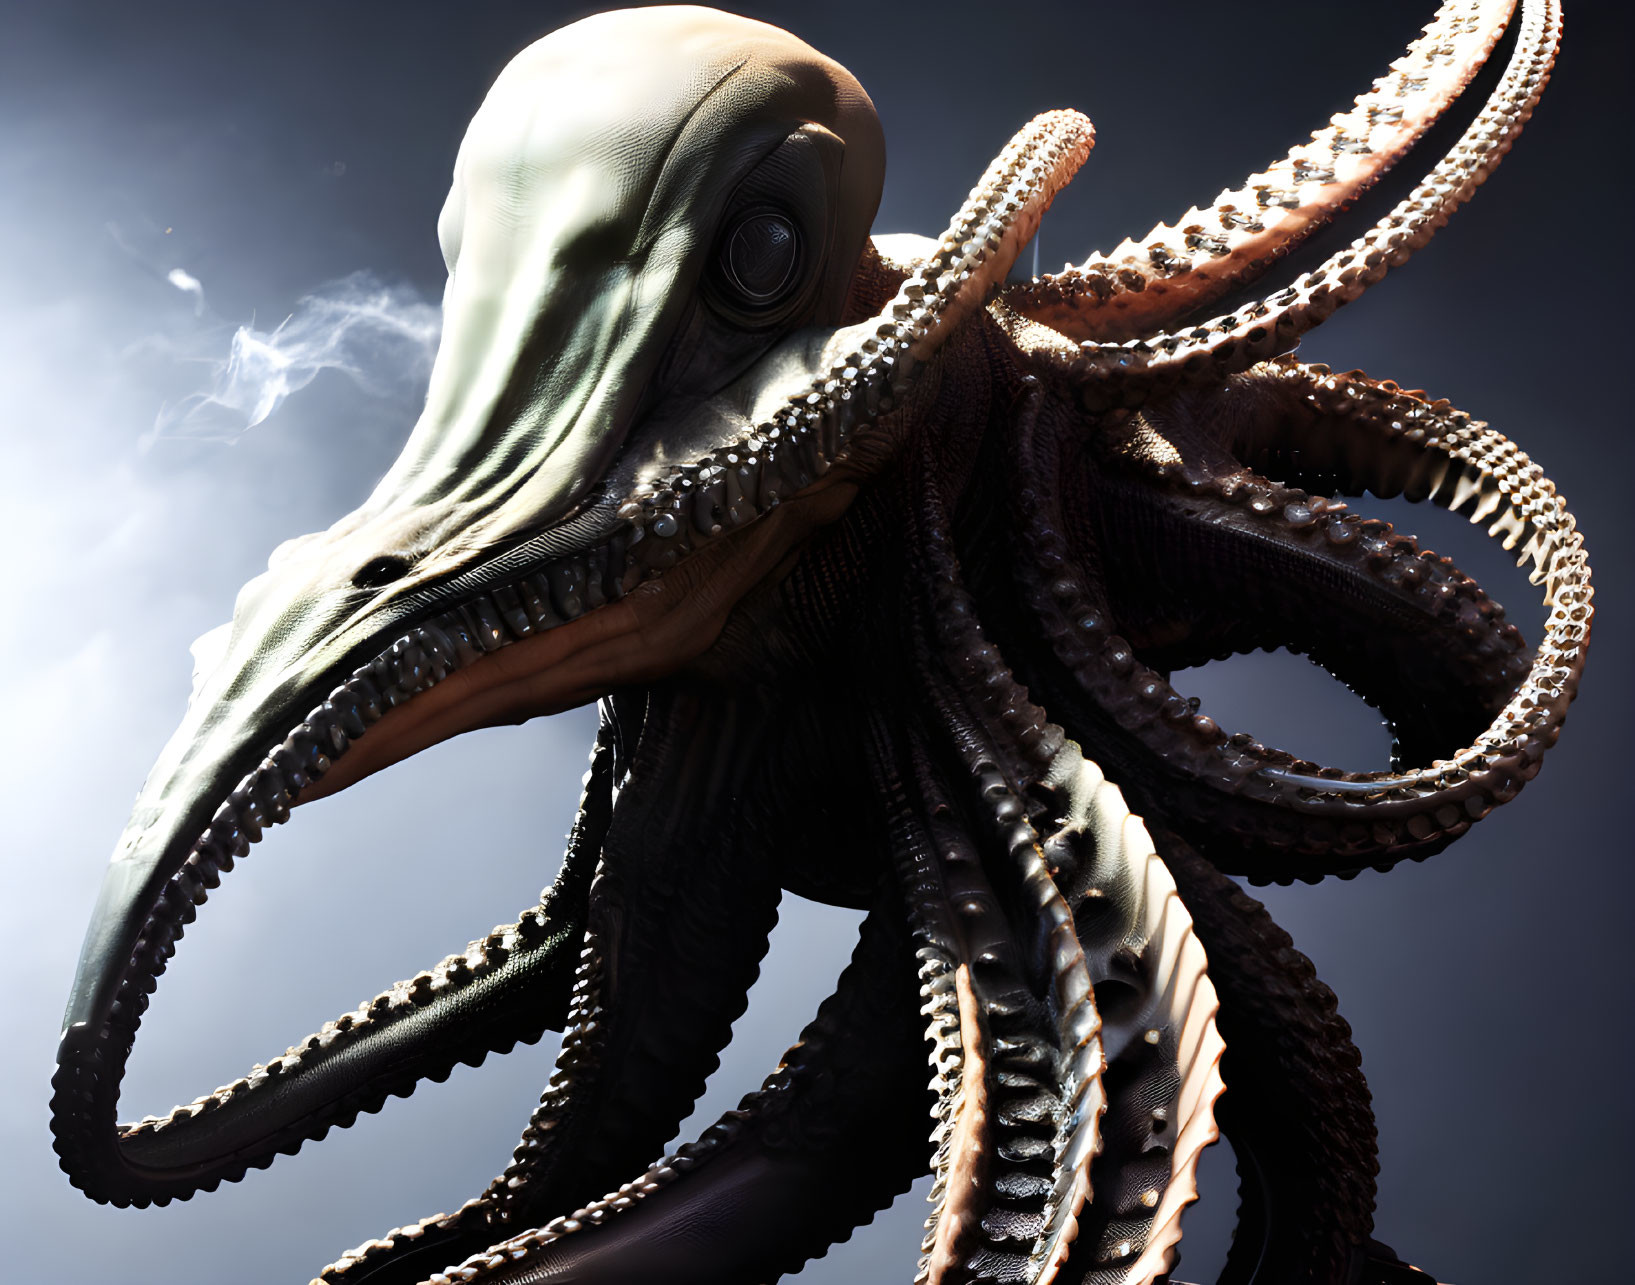 Digital artwork featuring creature with octopus-like head and tentacles, deep-set eyes on dark background